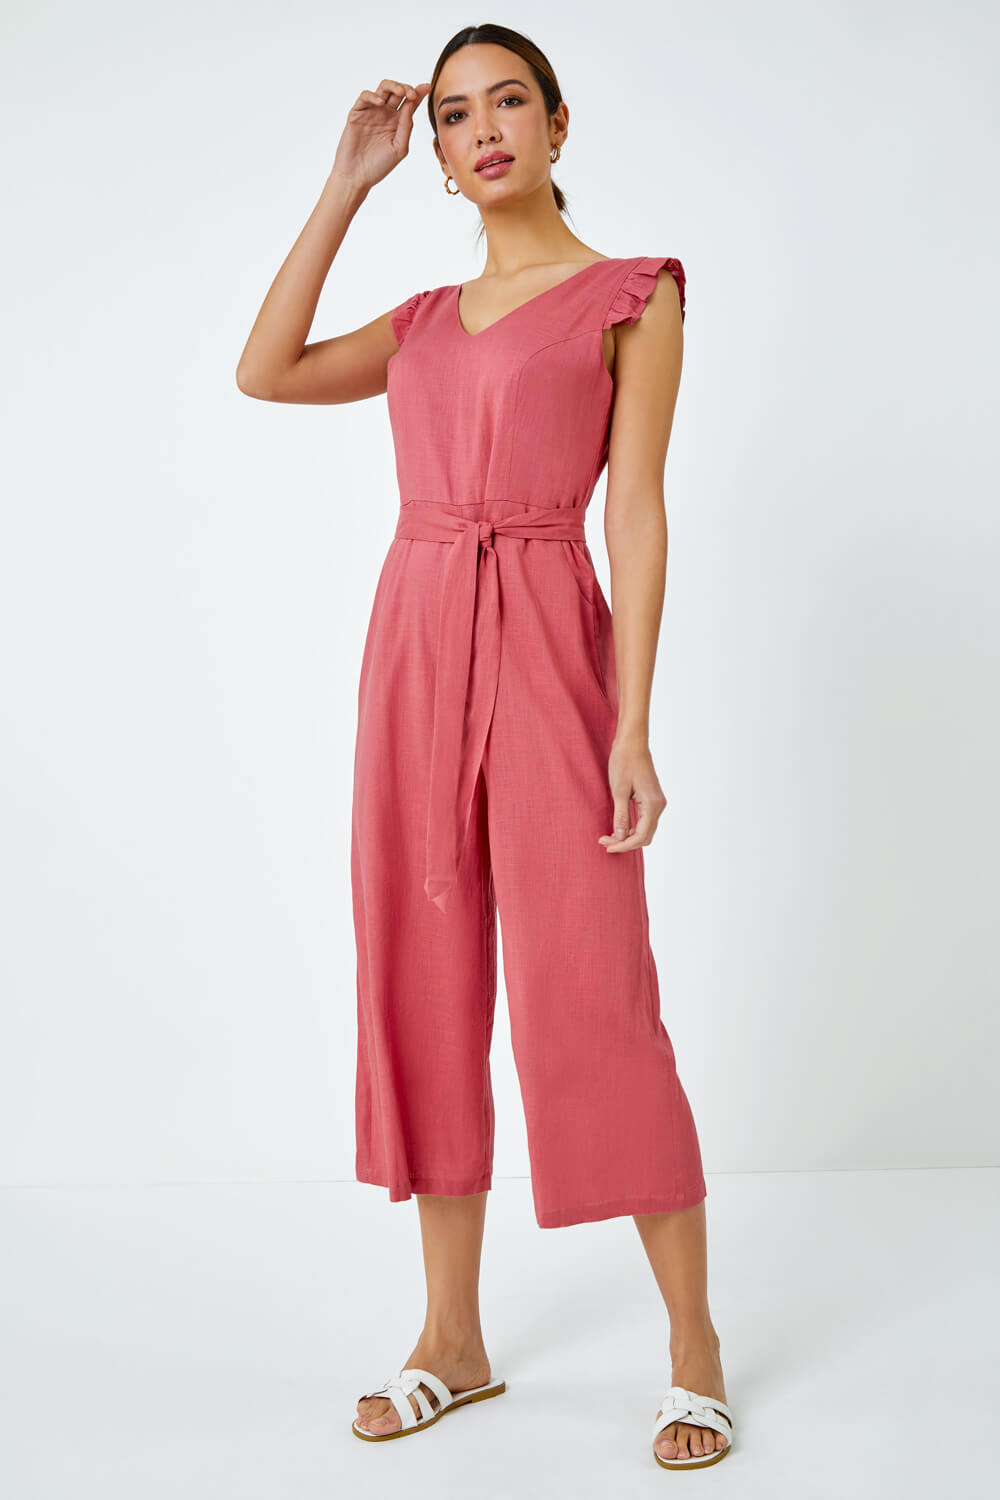 PINK Linen Blend Cropped Frill Jumpsuit, Image 4 of 5